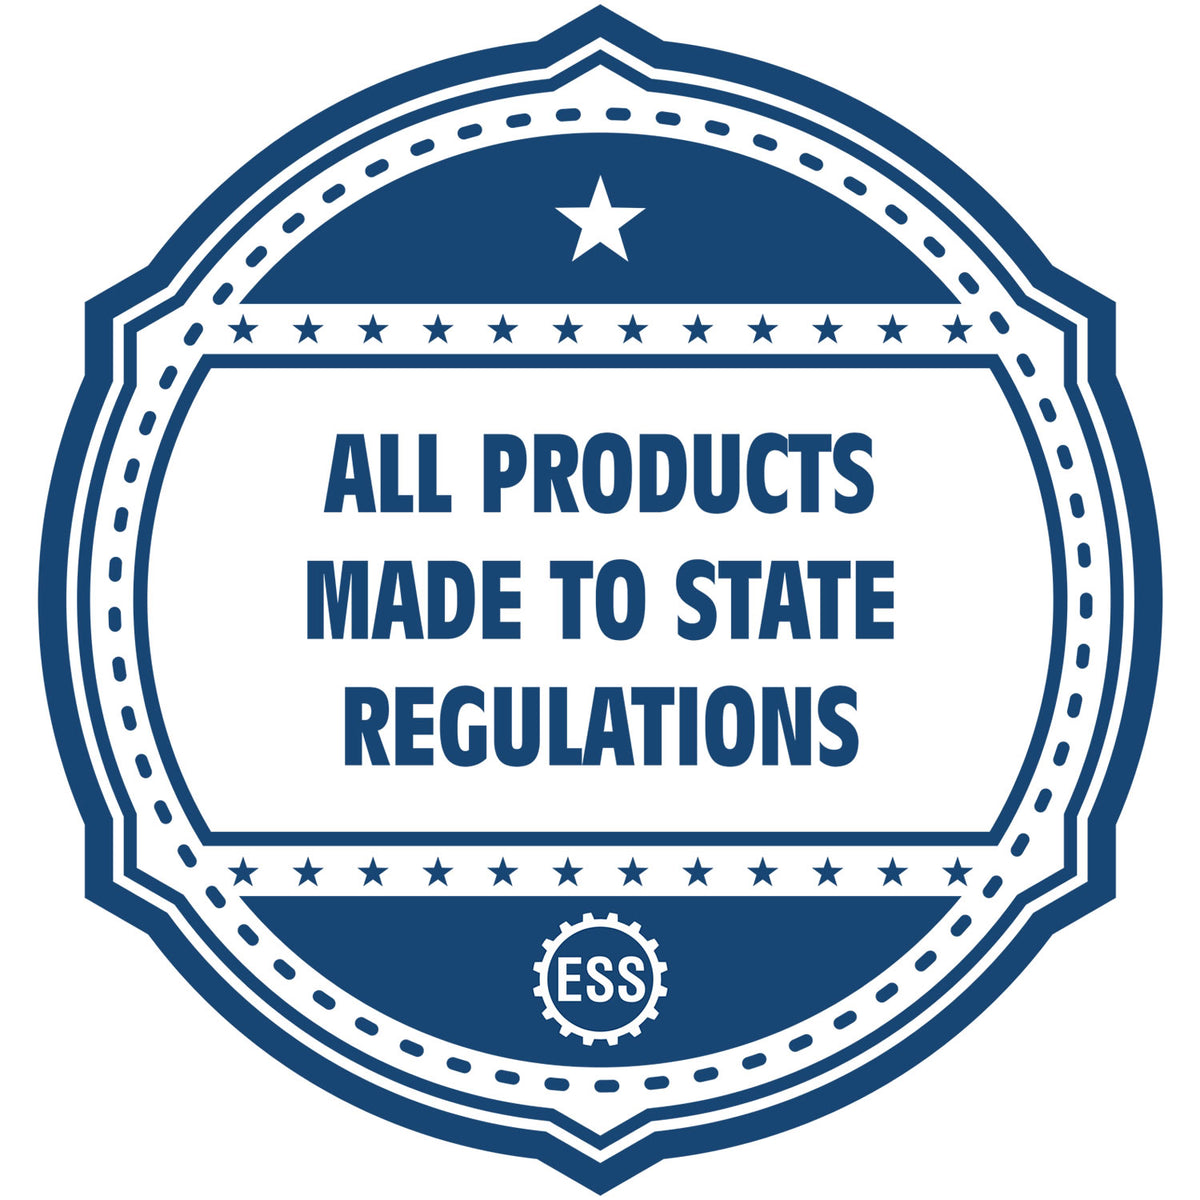 An icon or badge element for the Premium MaxLight Pre-Inked North Carolina Landscape Architectural Stamp showing that this product is made in compliance with state regulations.